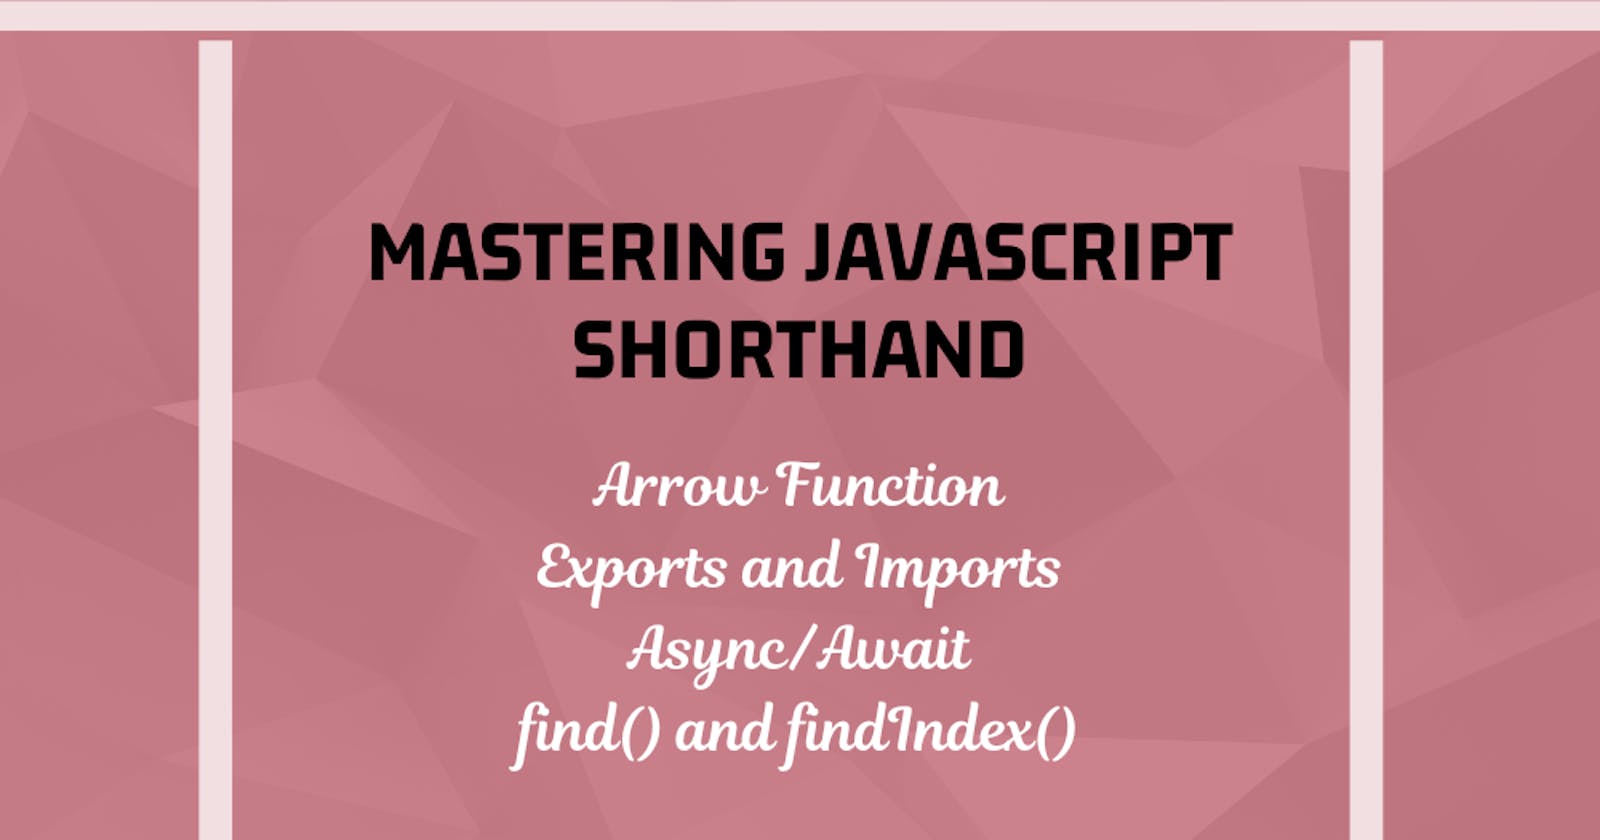 Mastering JS Shorthand Techniques Part-5: Async/Await, Array.findIndex(), and Array.find()